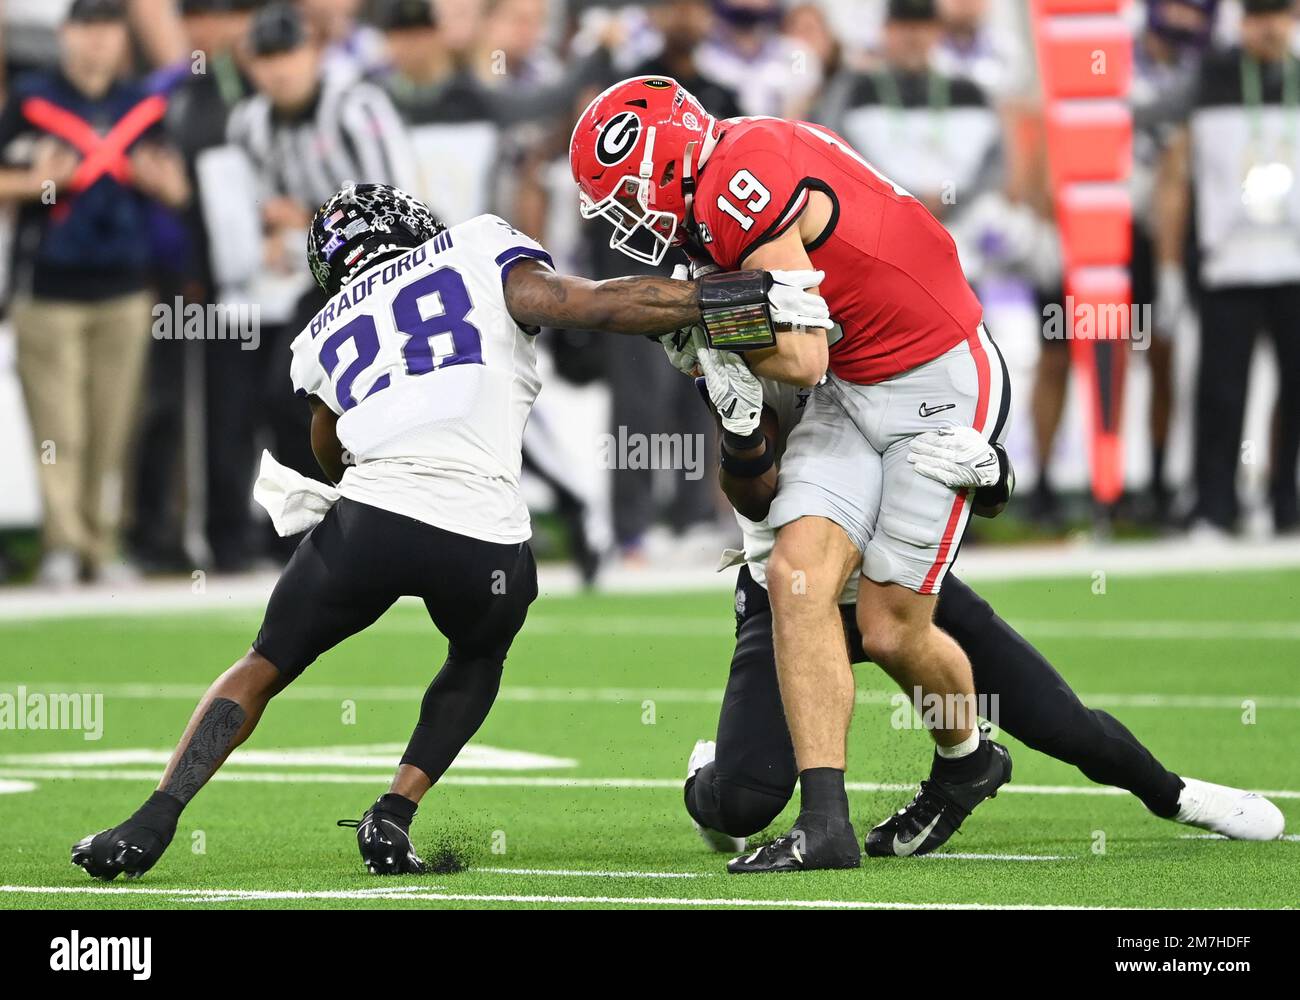 Inglewood, United States. 09th Jan, 2023. Georgia Bulldogs Kendall Milton carries the football in the first quarter against the TCU Horned Frogs at the 2023 NCAA College Football National Championship between Georgia and TCU at SoFi Stadium in Inglewood, California, on Monday, January 9, 2023. Photo by Mike Goulding/UPI Credit: UPI/Alamy Live News Stock Photo